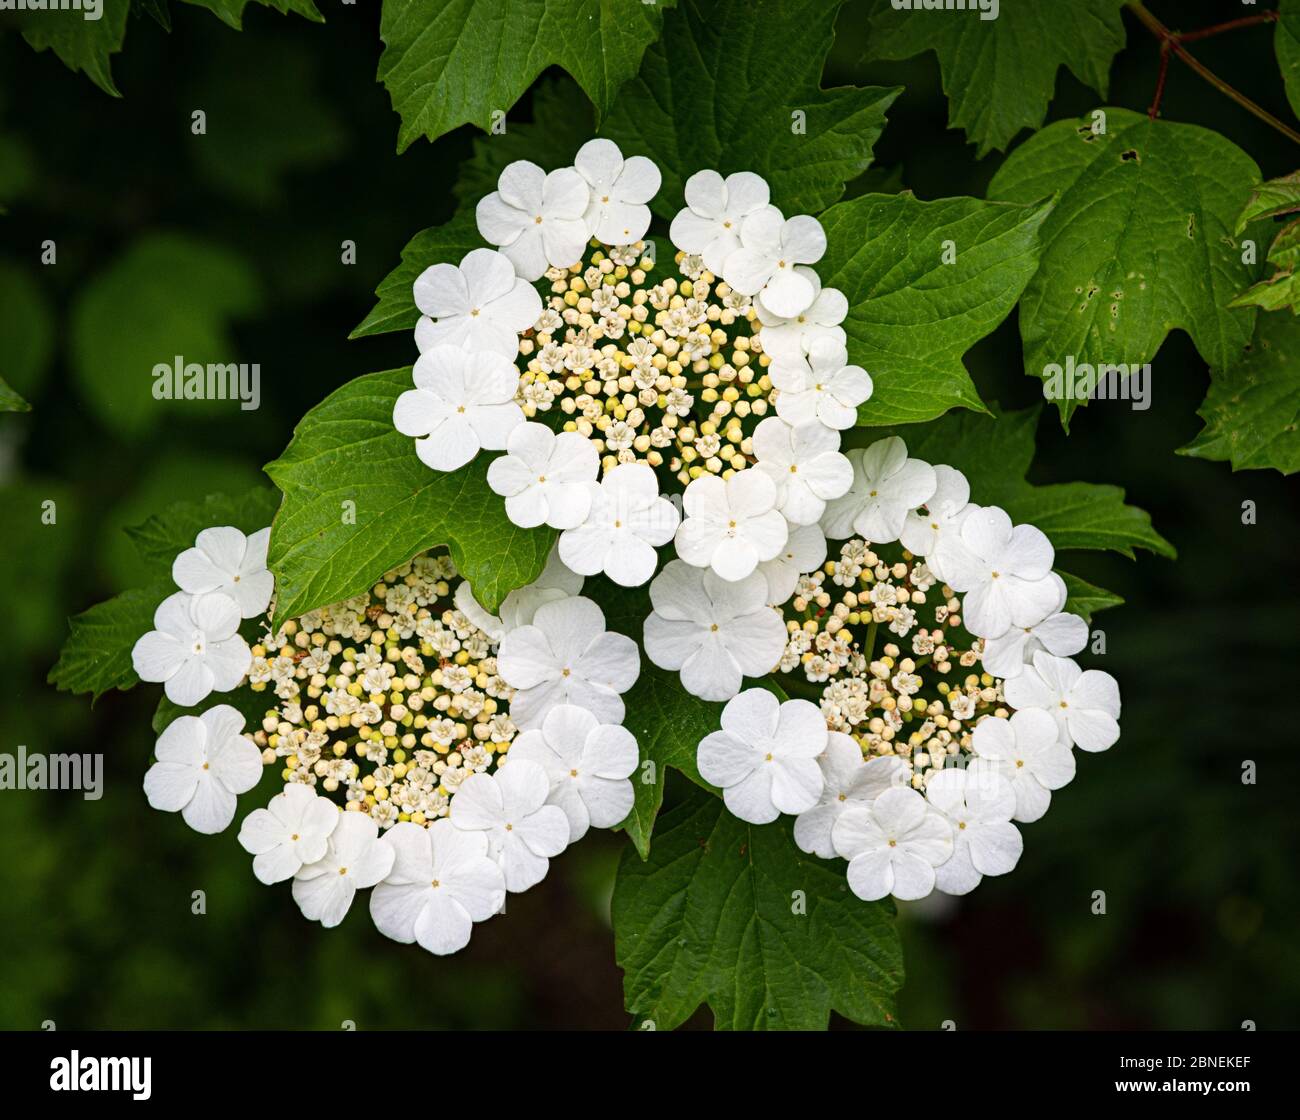 Cranberry viburnum (Viburnum trilobum) flower clusters, called corymbs. In each corymb, dozens of small fertile flowers are surrounded by bright white Stock Photo